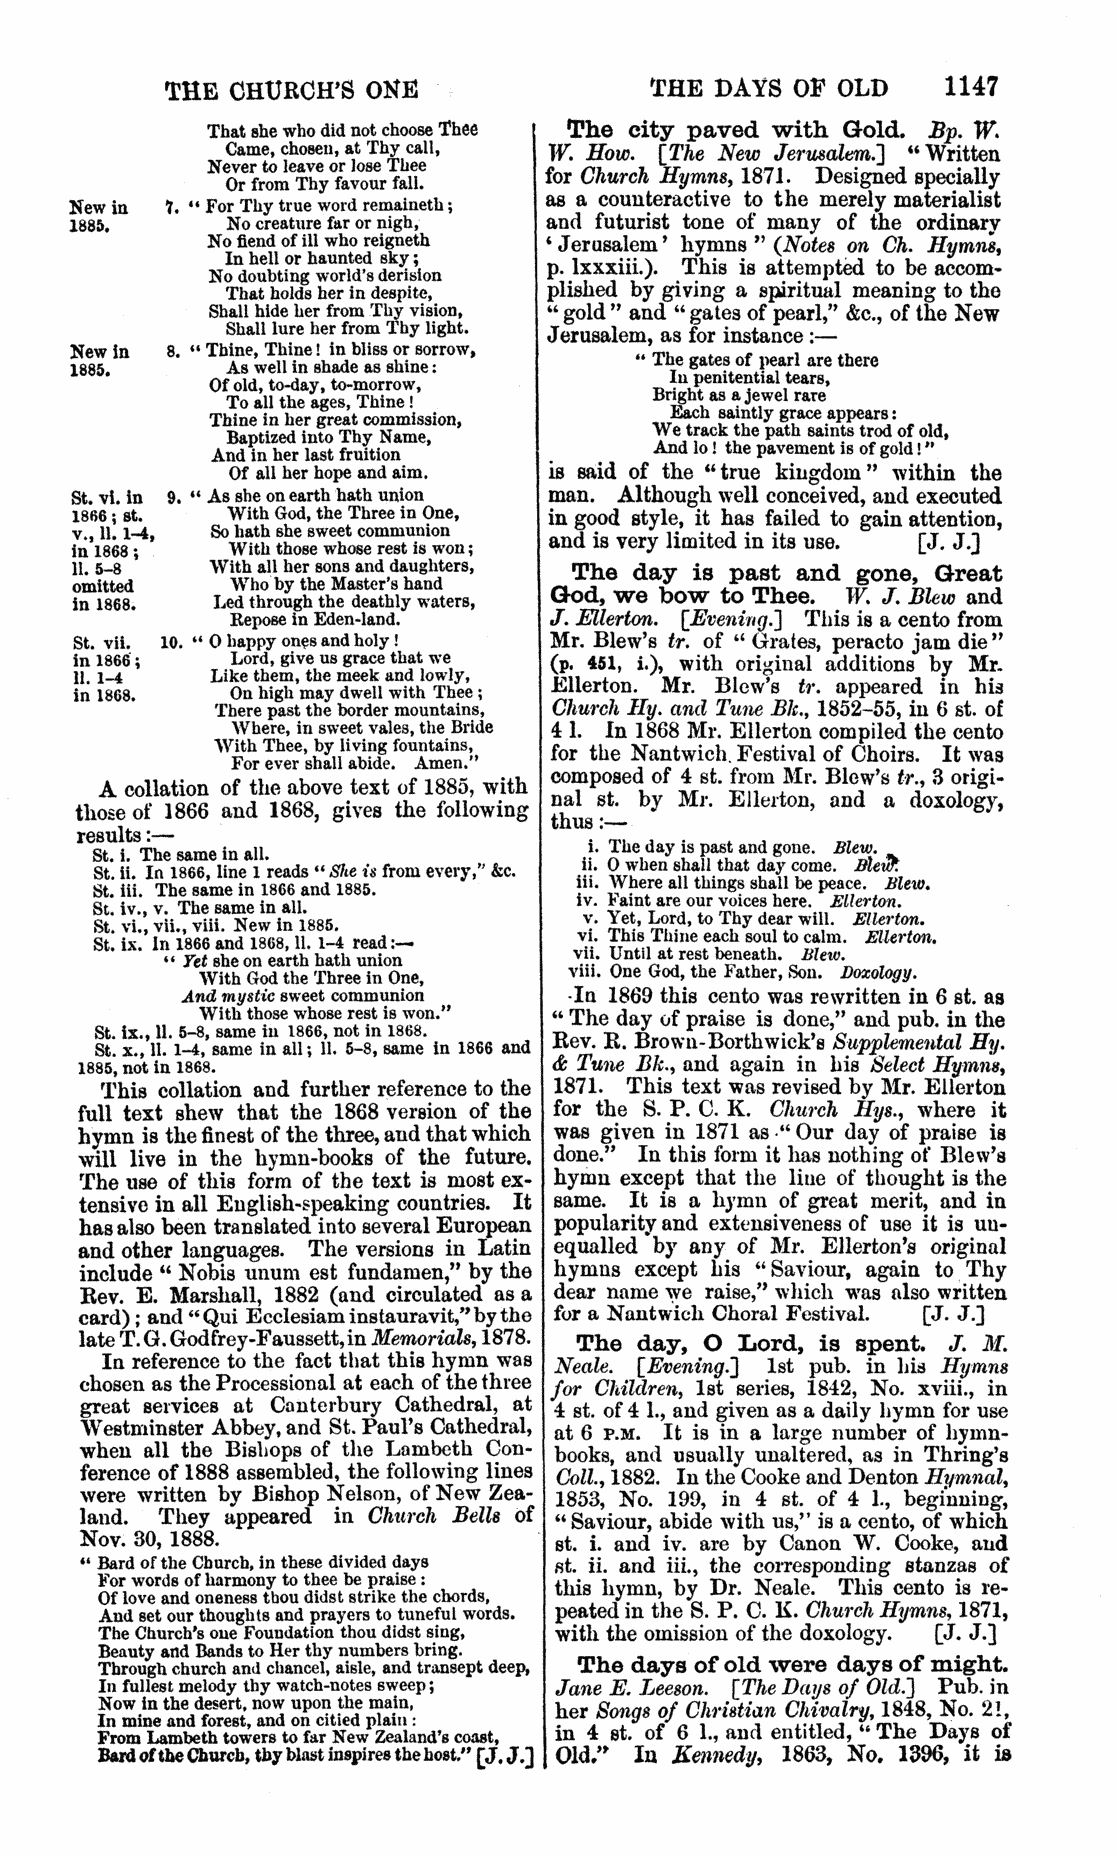 Image of page 1147